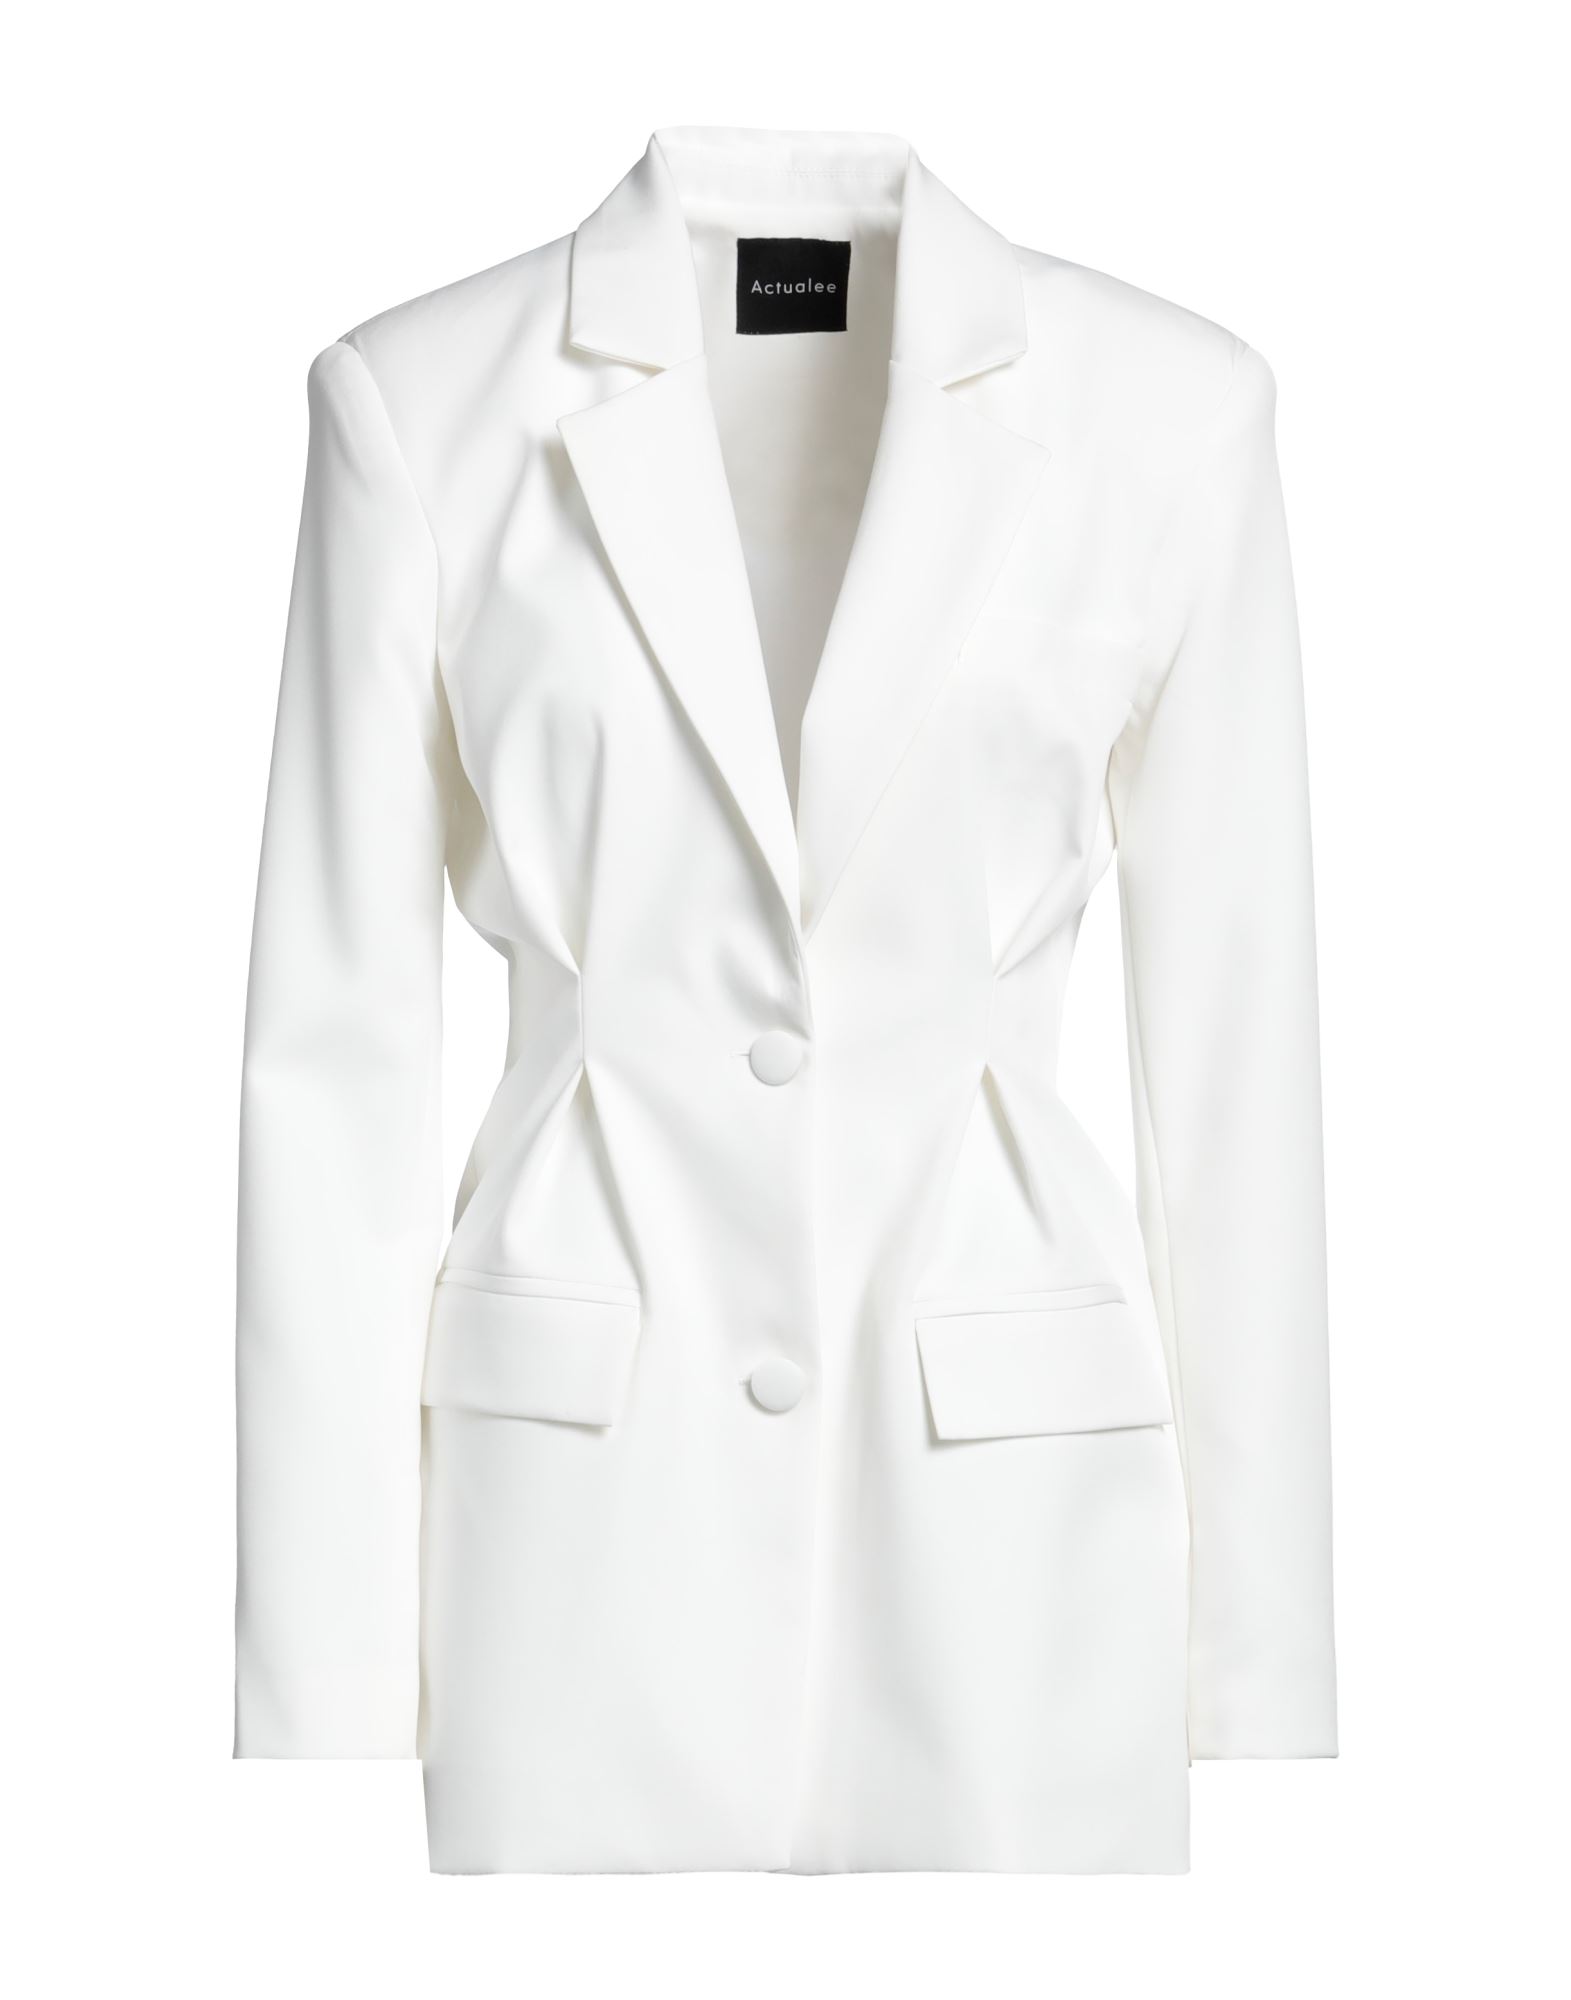 ACTUALEE ACTUALEE WOMAN SUIT JACKET WHITE SIZE 4 POLYESTER, ELASTANE